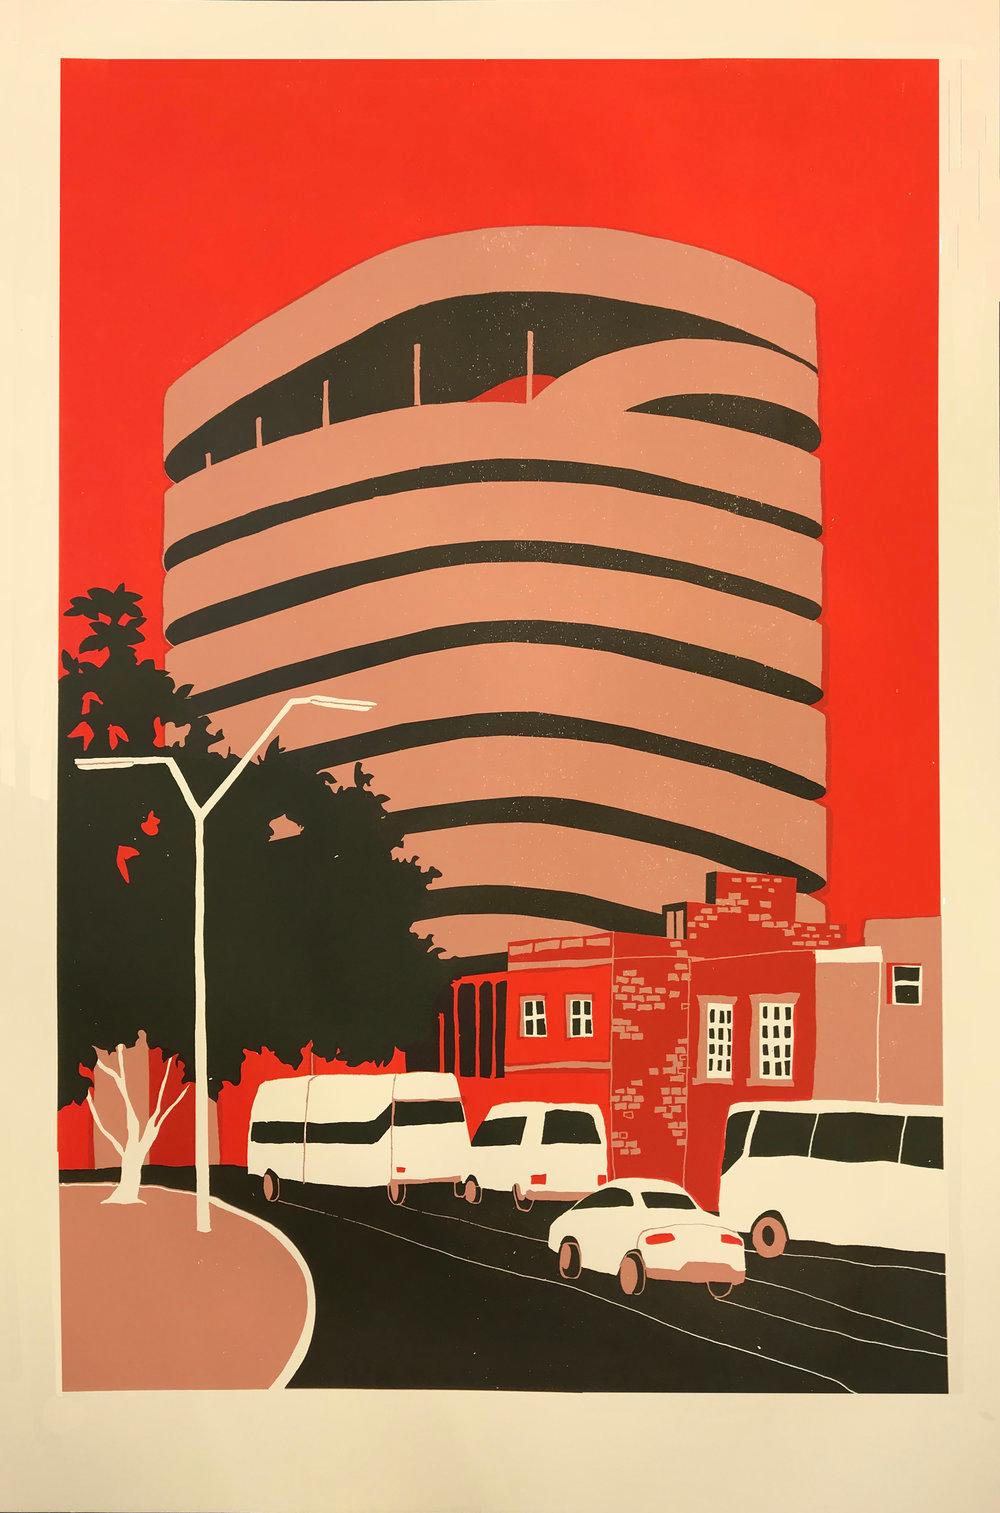 Tower Block, Car Park and Civic Building diptych
Overall size cm : H291 x W201

Tower Block – Manaus, Eliza Southwood
Limited Edition Silkscreen Print of 20
Silkscreen Print on Paper
Size: H 97cm x W 67cm
Signed and titled

Car Park – Manaus, ELiza